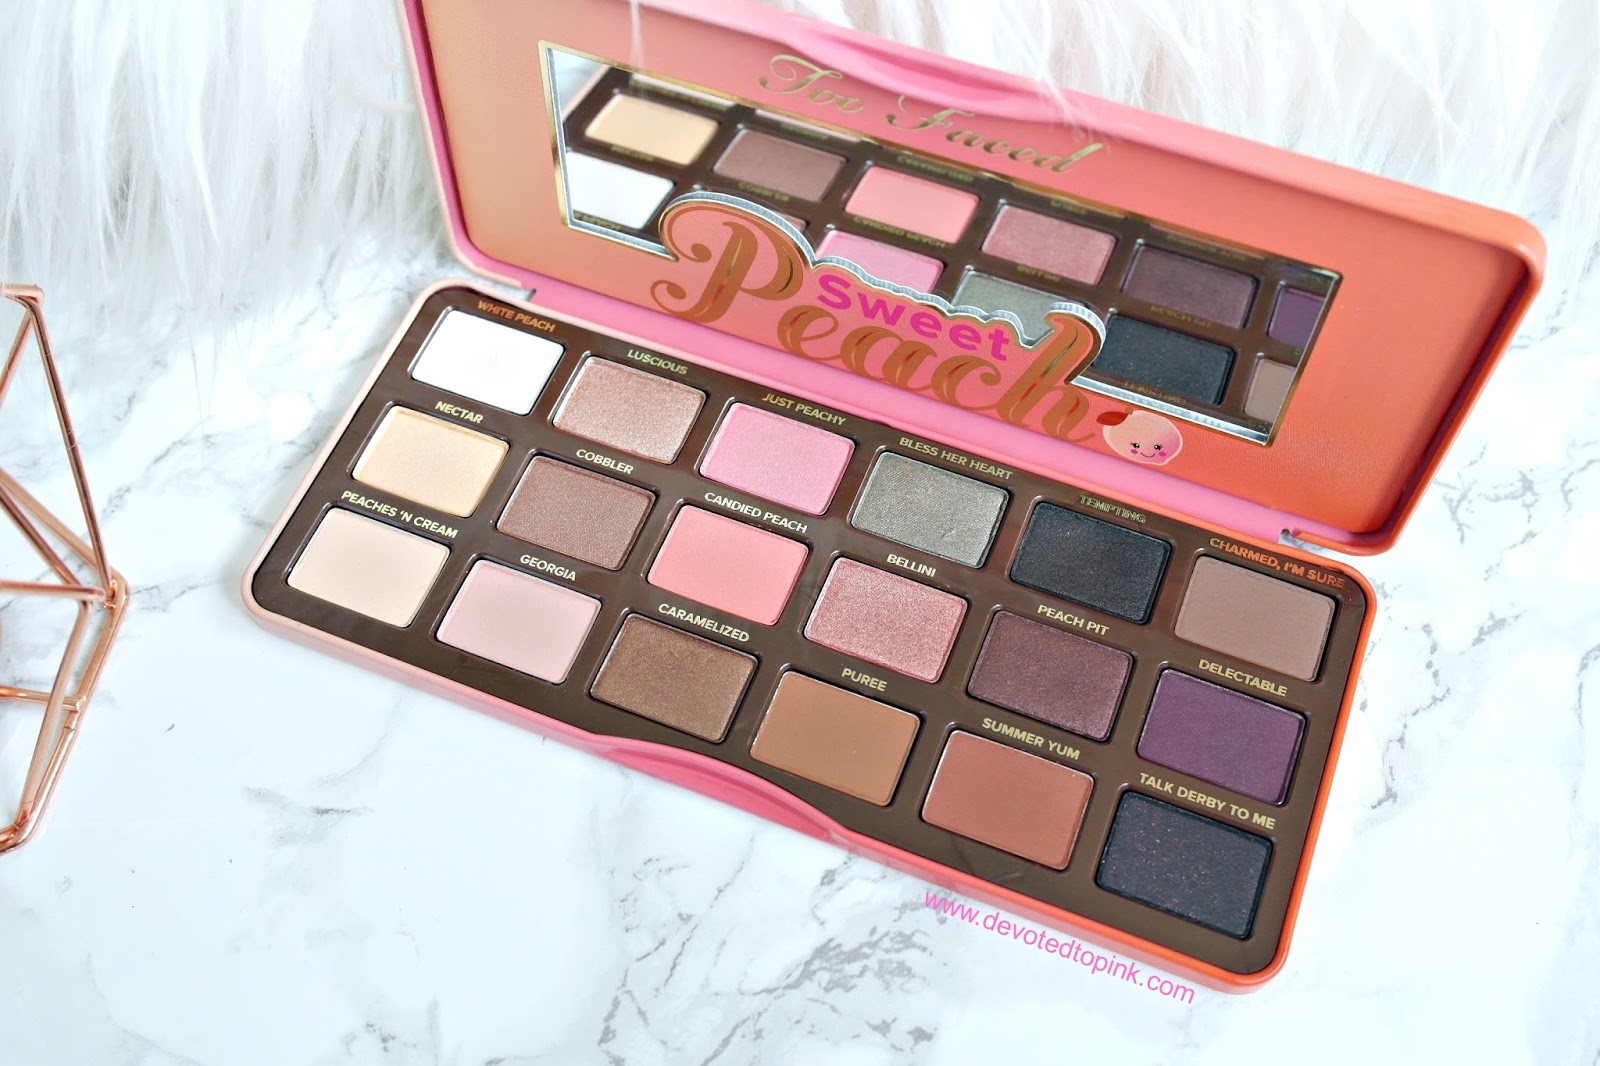 too faced sweet peach eyeshadow palette review